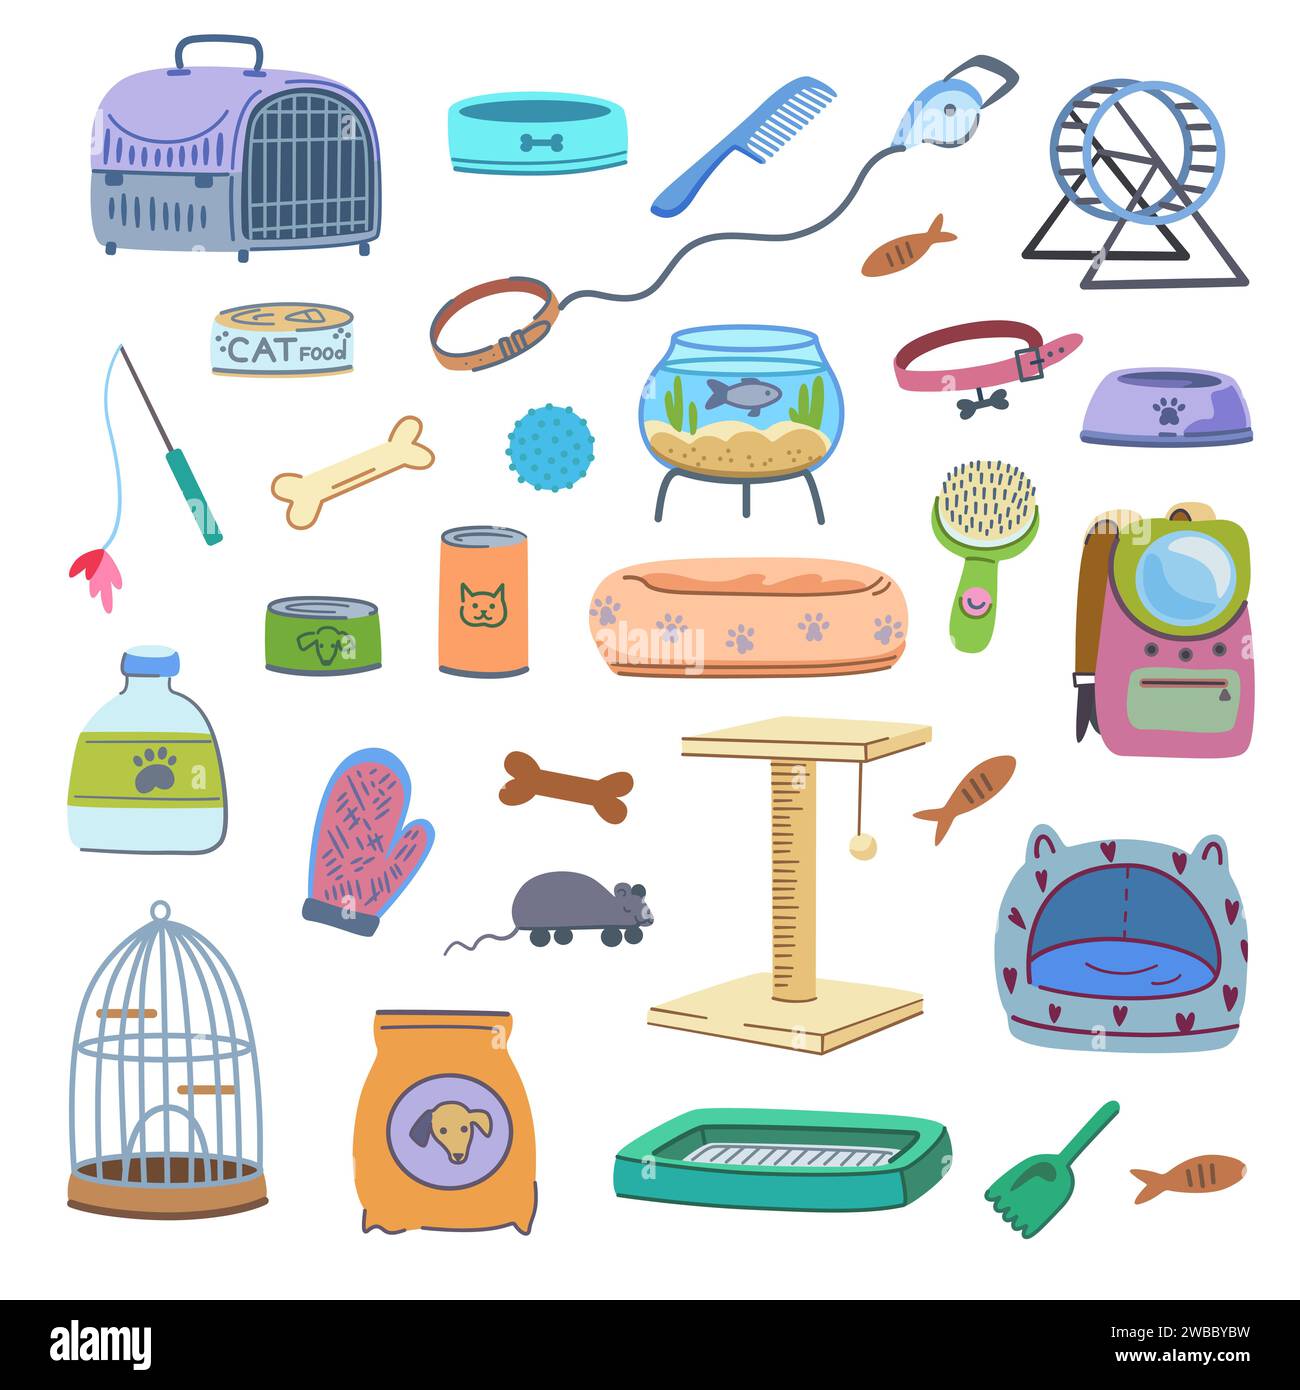 Set of pet supplies. Elements of veterinary and pet shop elements, food, toys, cages, beds. Vector illustration Stock Vector